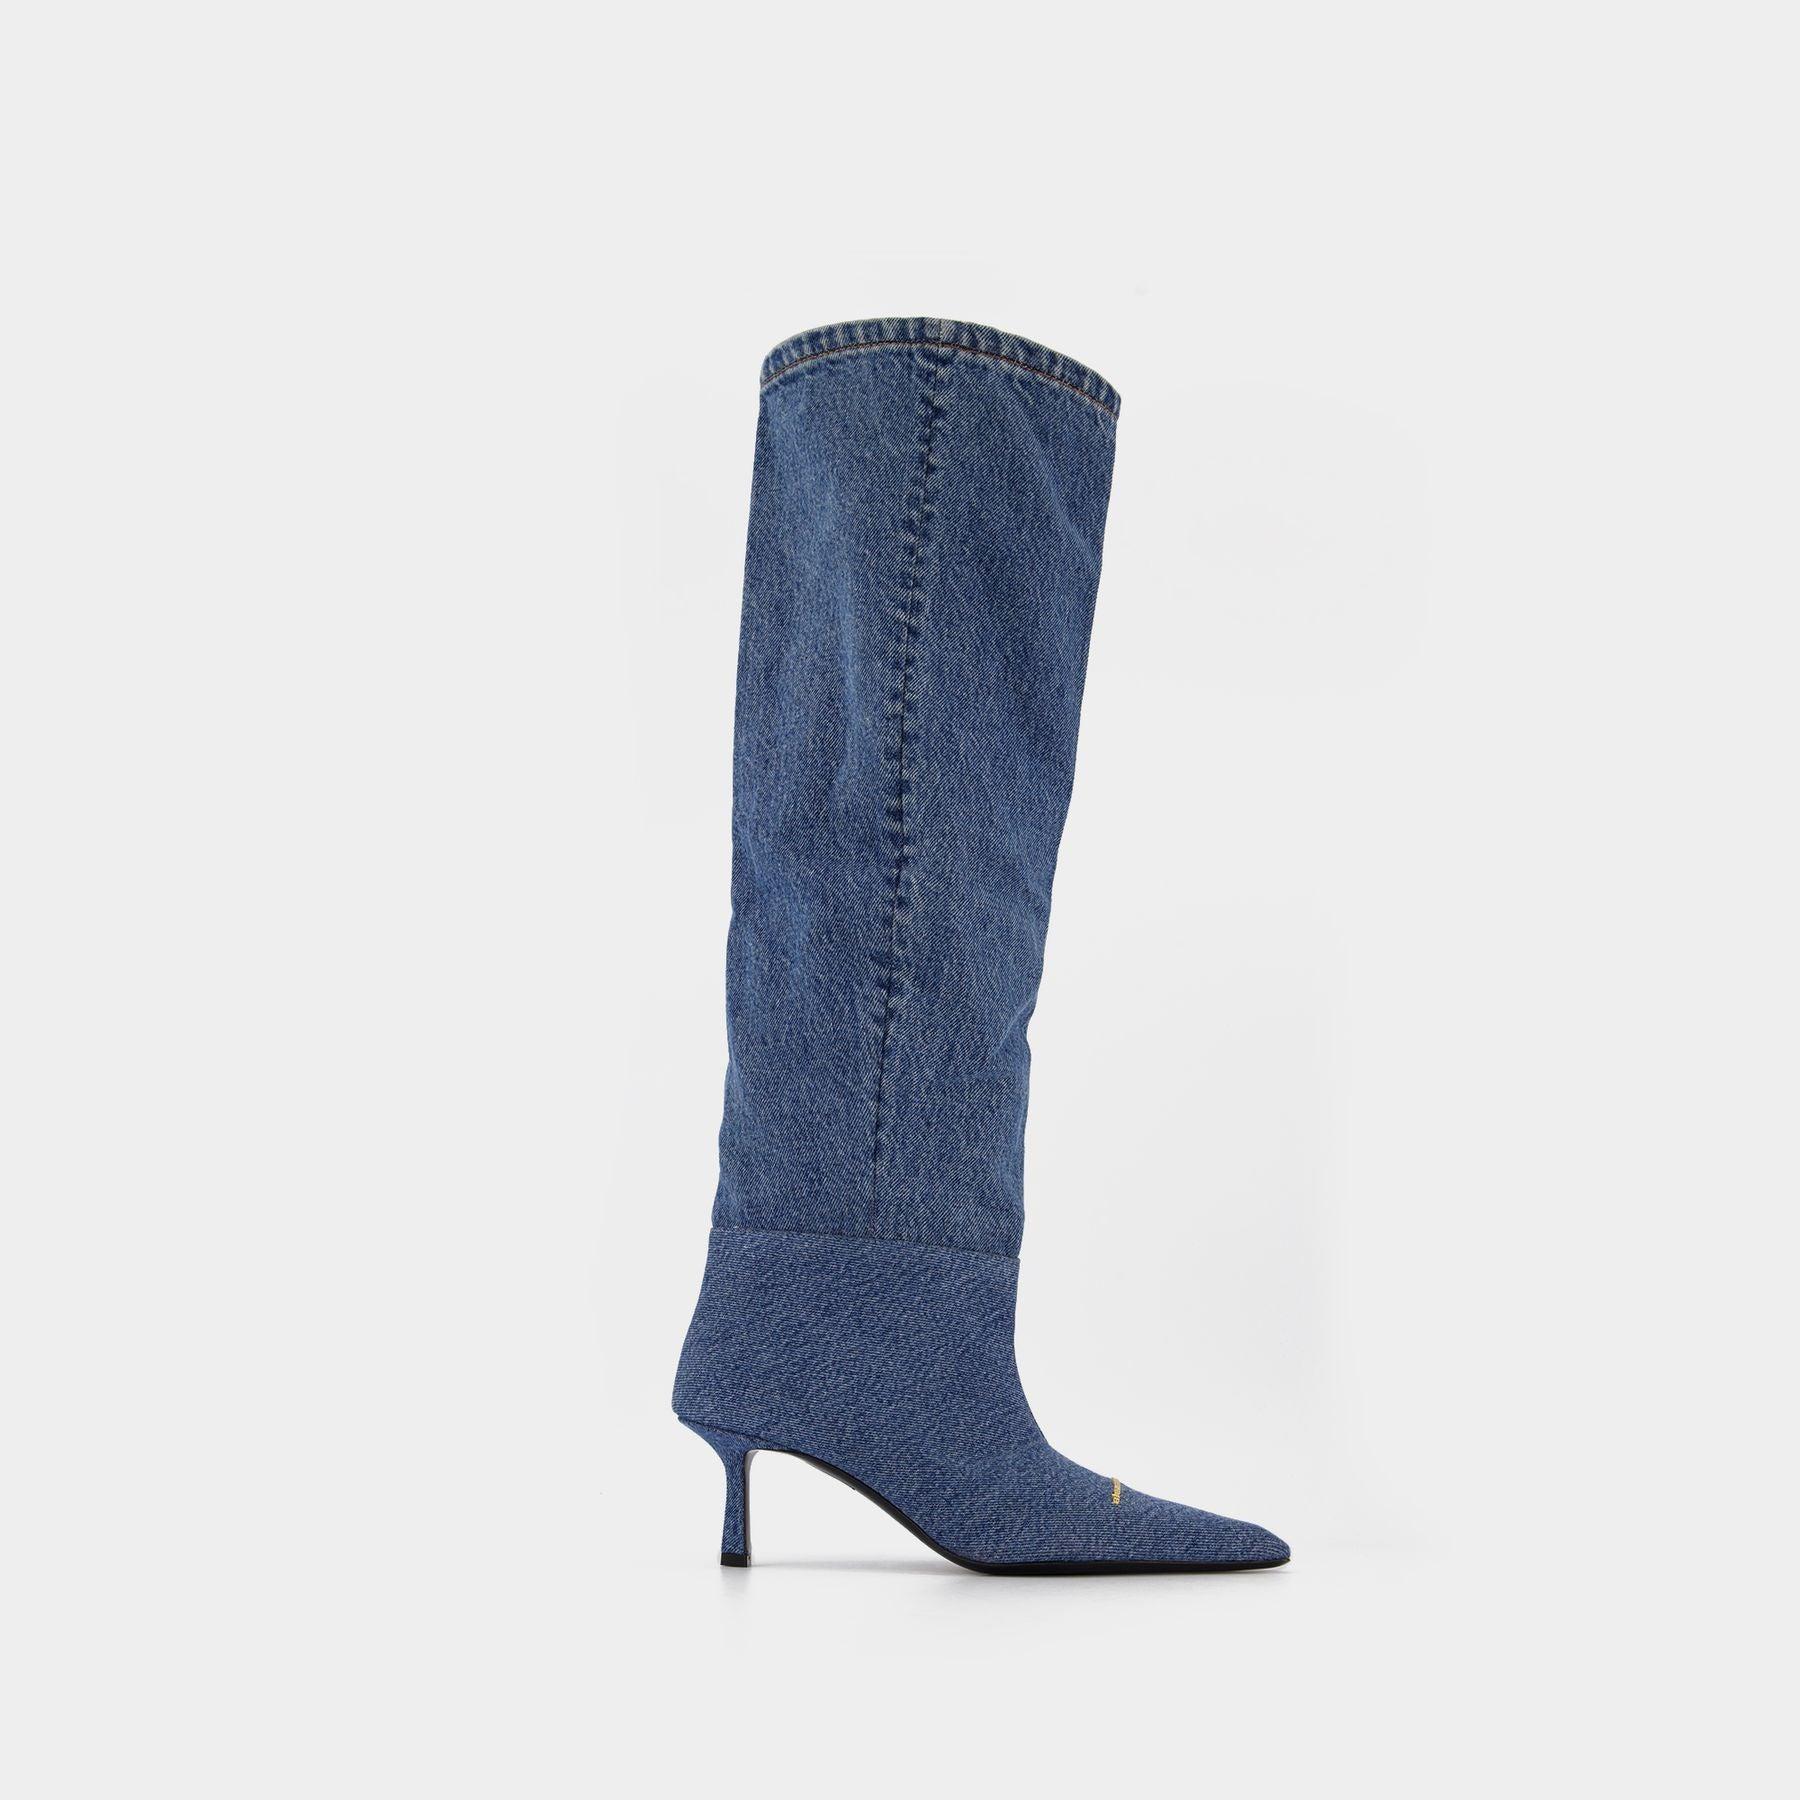 Alexander Wang Viola Slouch Boots in Blue | Lyst Canada